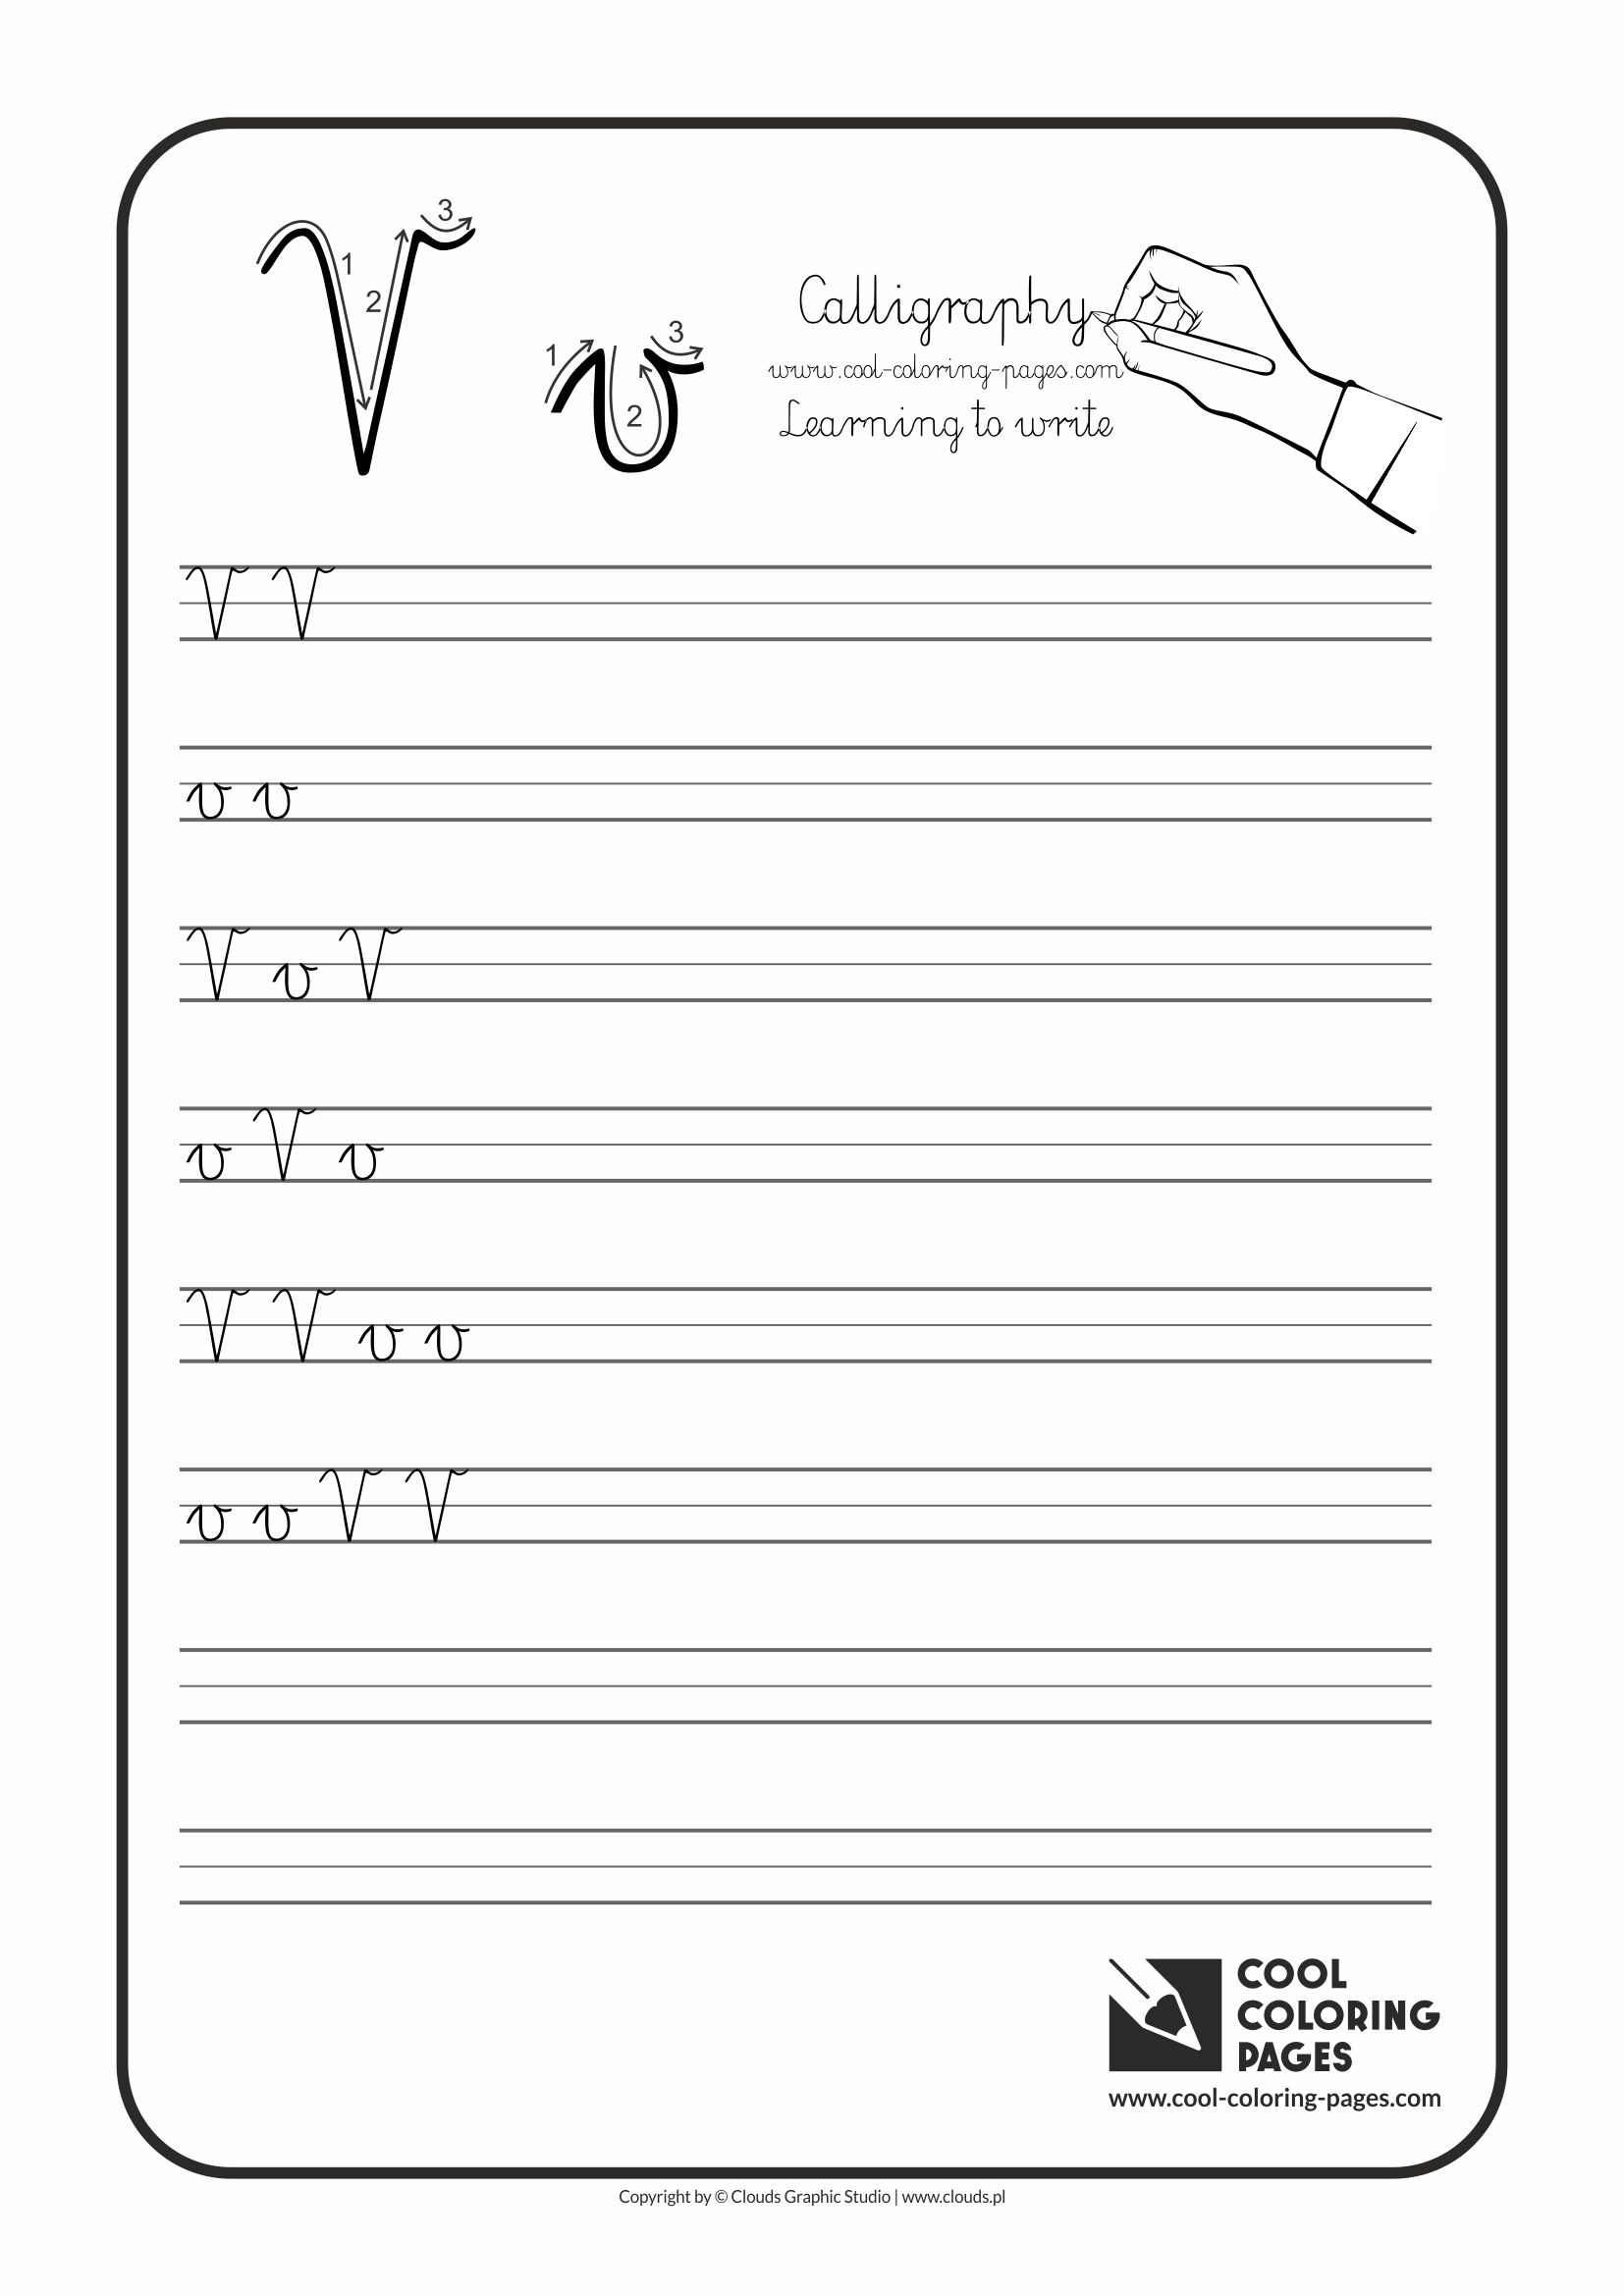 Cool Coloring Pages / Calligraphy / Letter V - Handwriting for kids / Worksheets